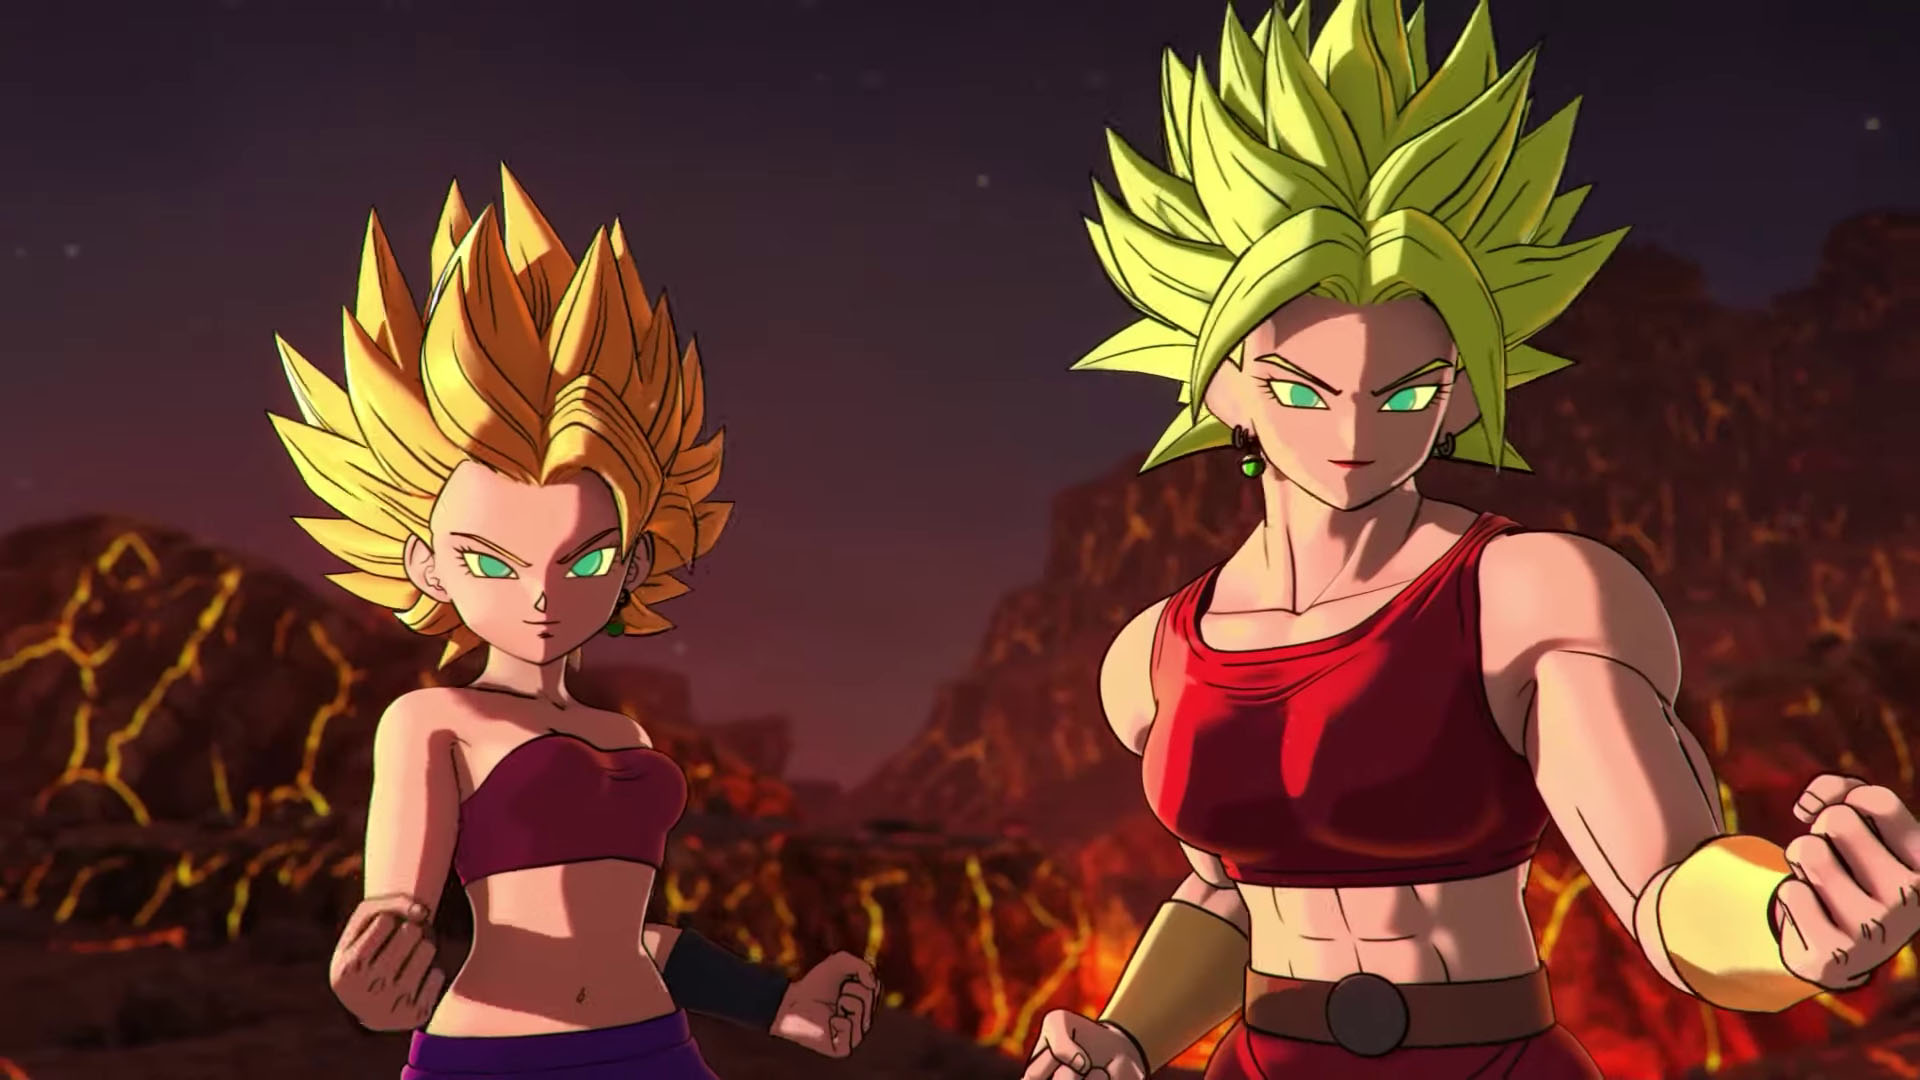 Dragon Ball Xenoverse 2 to Add New Character and Missions in DLC 12